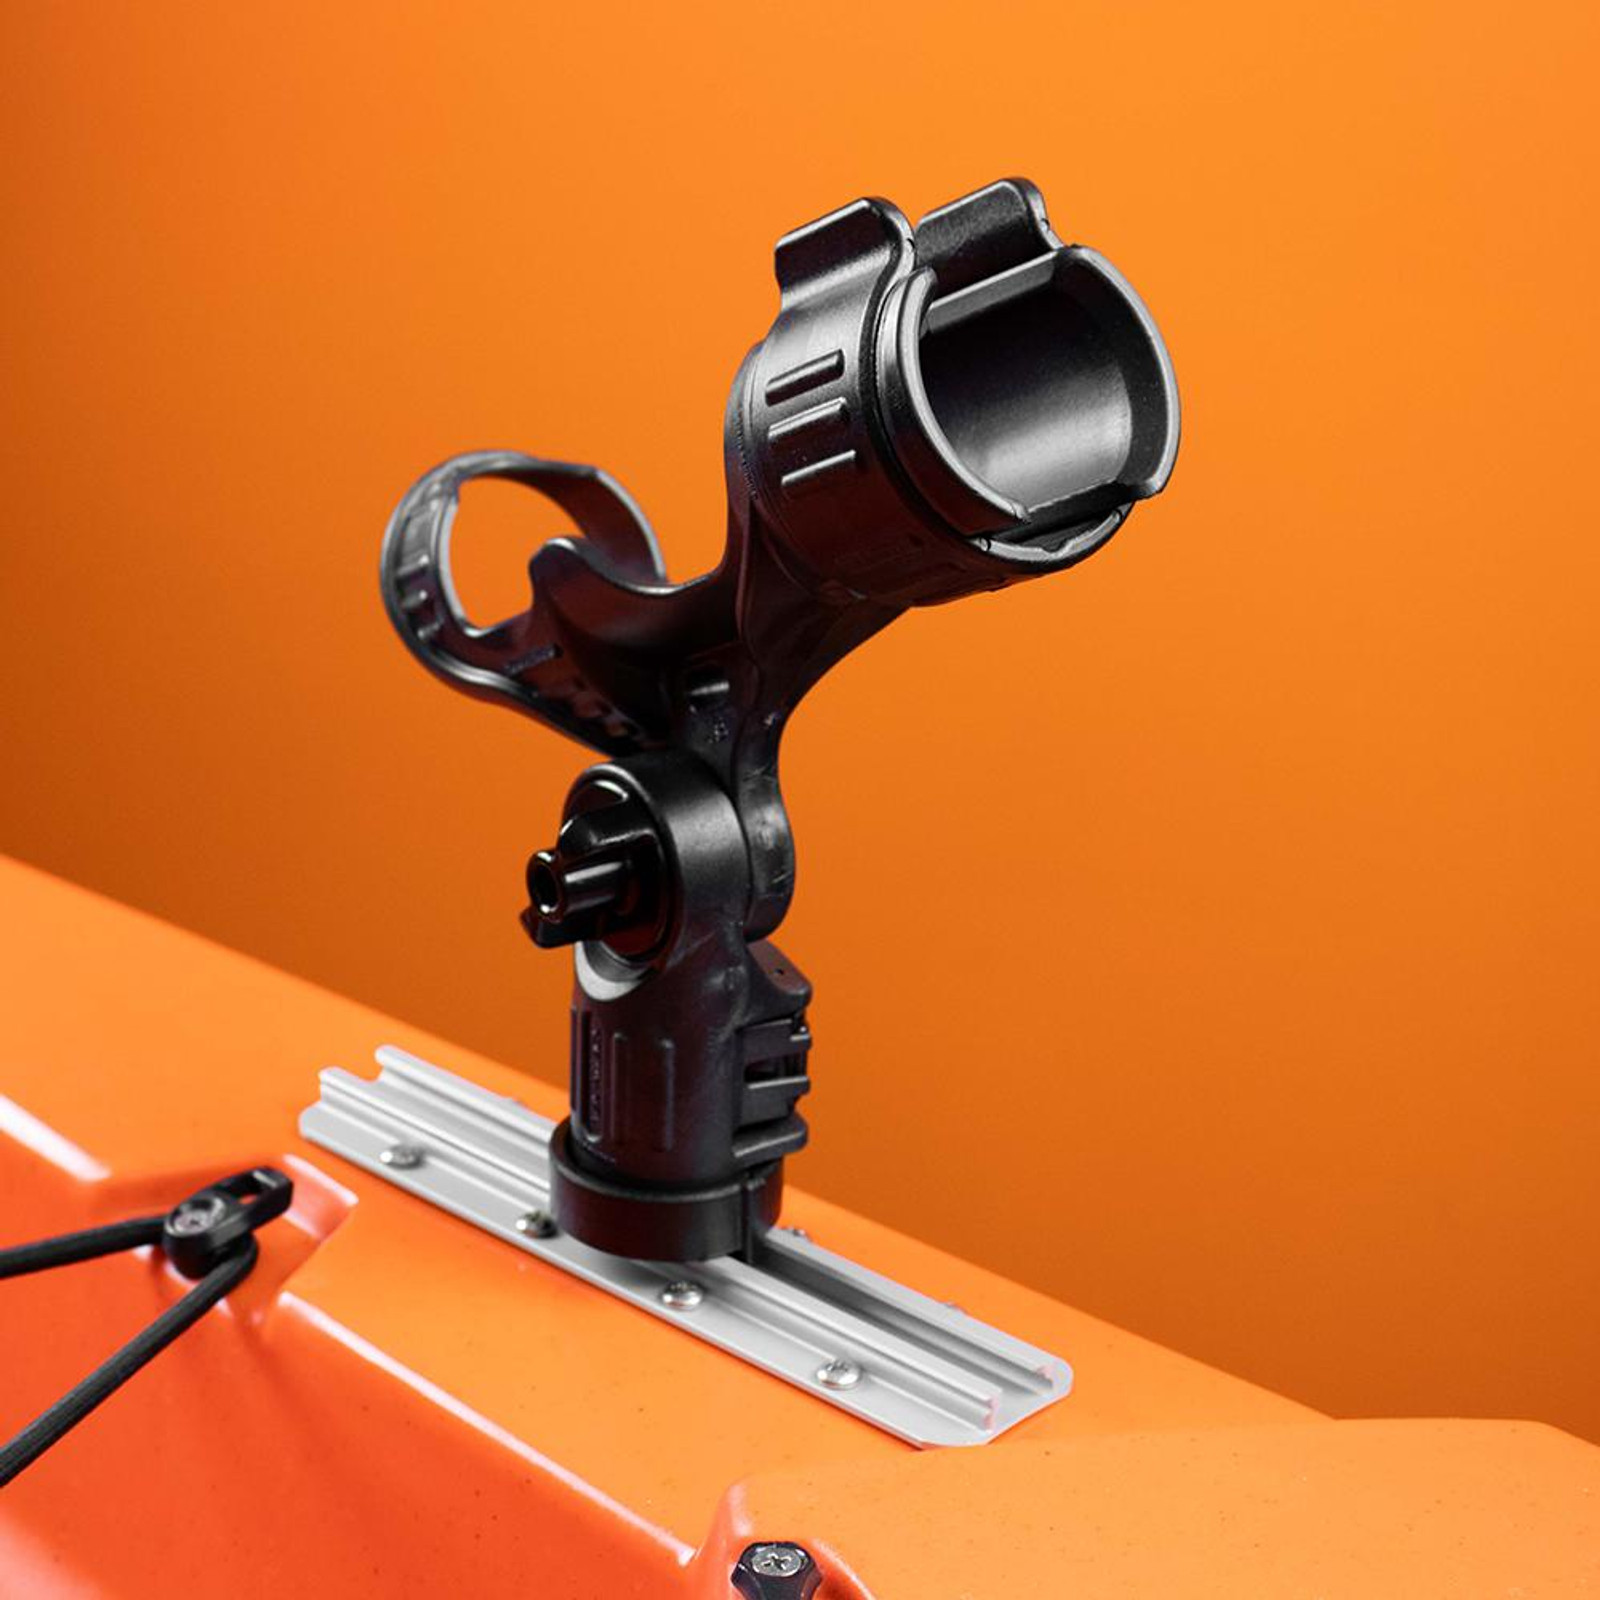 Omega Rod Holder with Track Mounted LockNLoad Mounting System RHM-1001